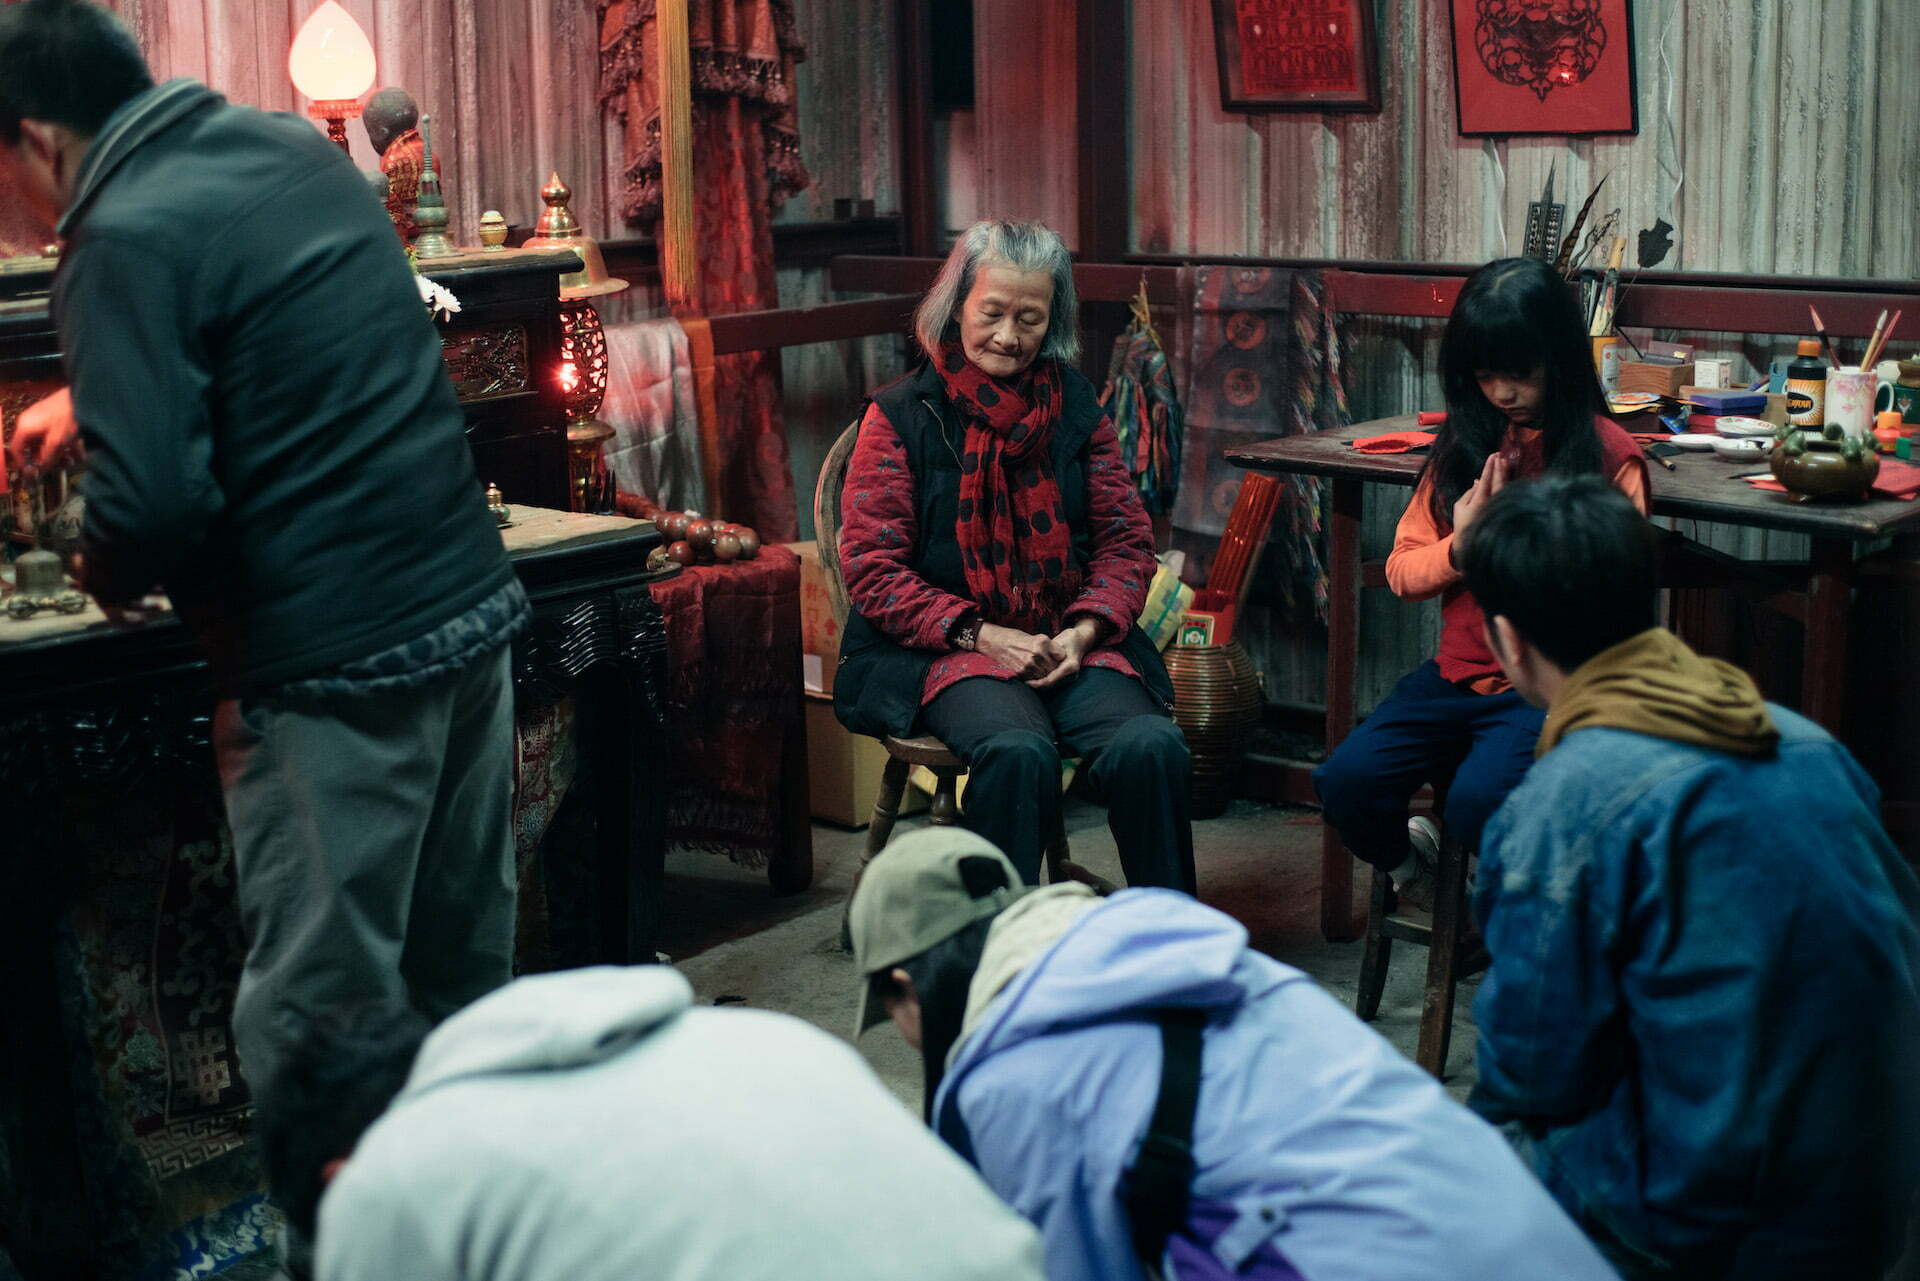 Incantation is loosely inspired by a true Taiwanese story involving a family of cult worshippers